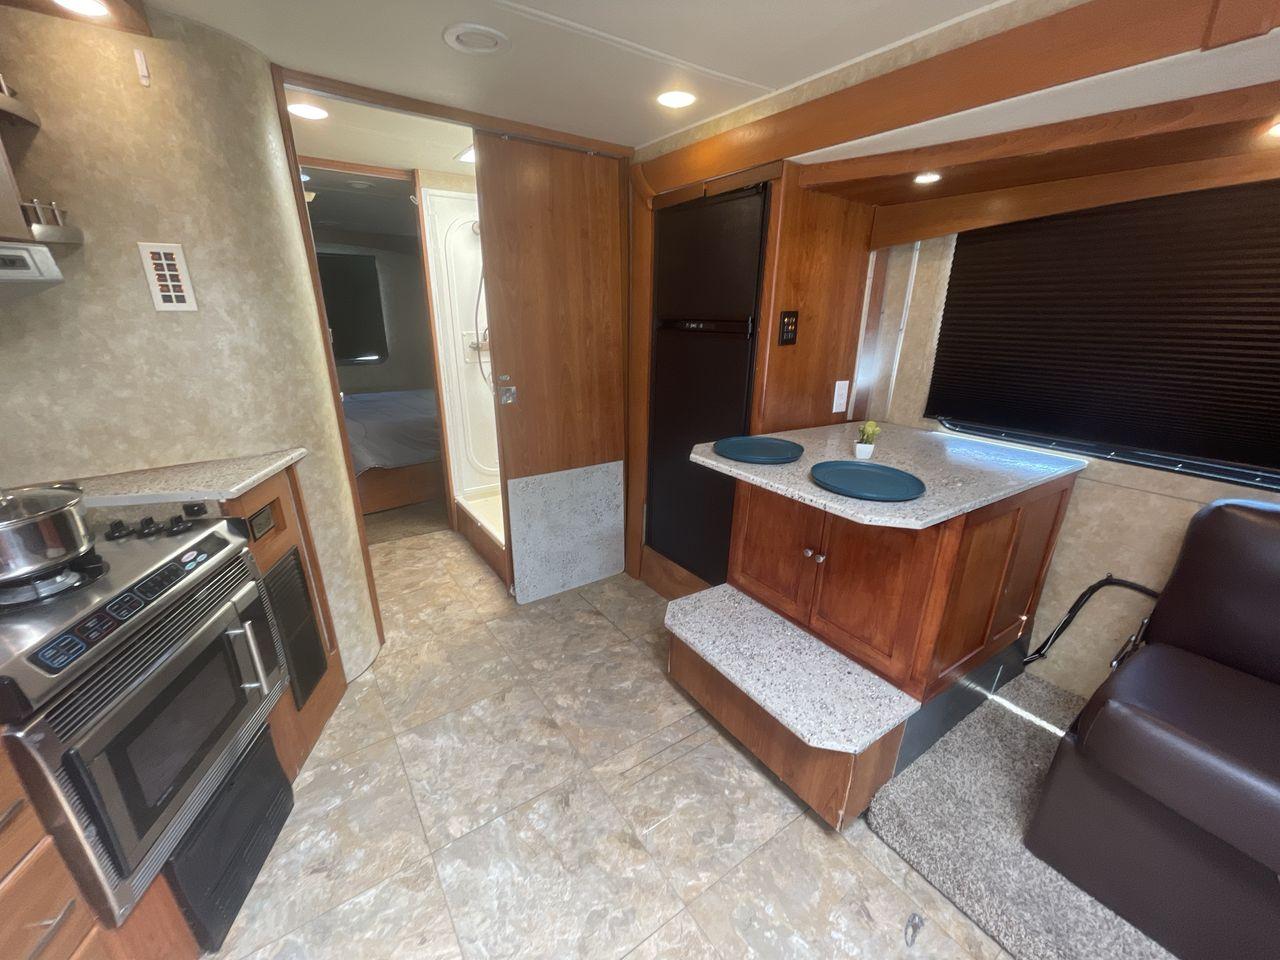 2008 TAN COACHMEN LEPRECHAUN 320DS E-450 (1FDXE45S08D) with an 6.8L V10 SOHC 20V engine, Length: 31.5 ft. | Dry Weight: 12,555 lbs. | Gross Weight: 14,500 lbs. | Slides: 2 transmission, located at 4319 N Main St, Cleburne, TX, 76033, (817) 678-5133, 32.385960, -97.391212 - Photo #13